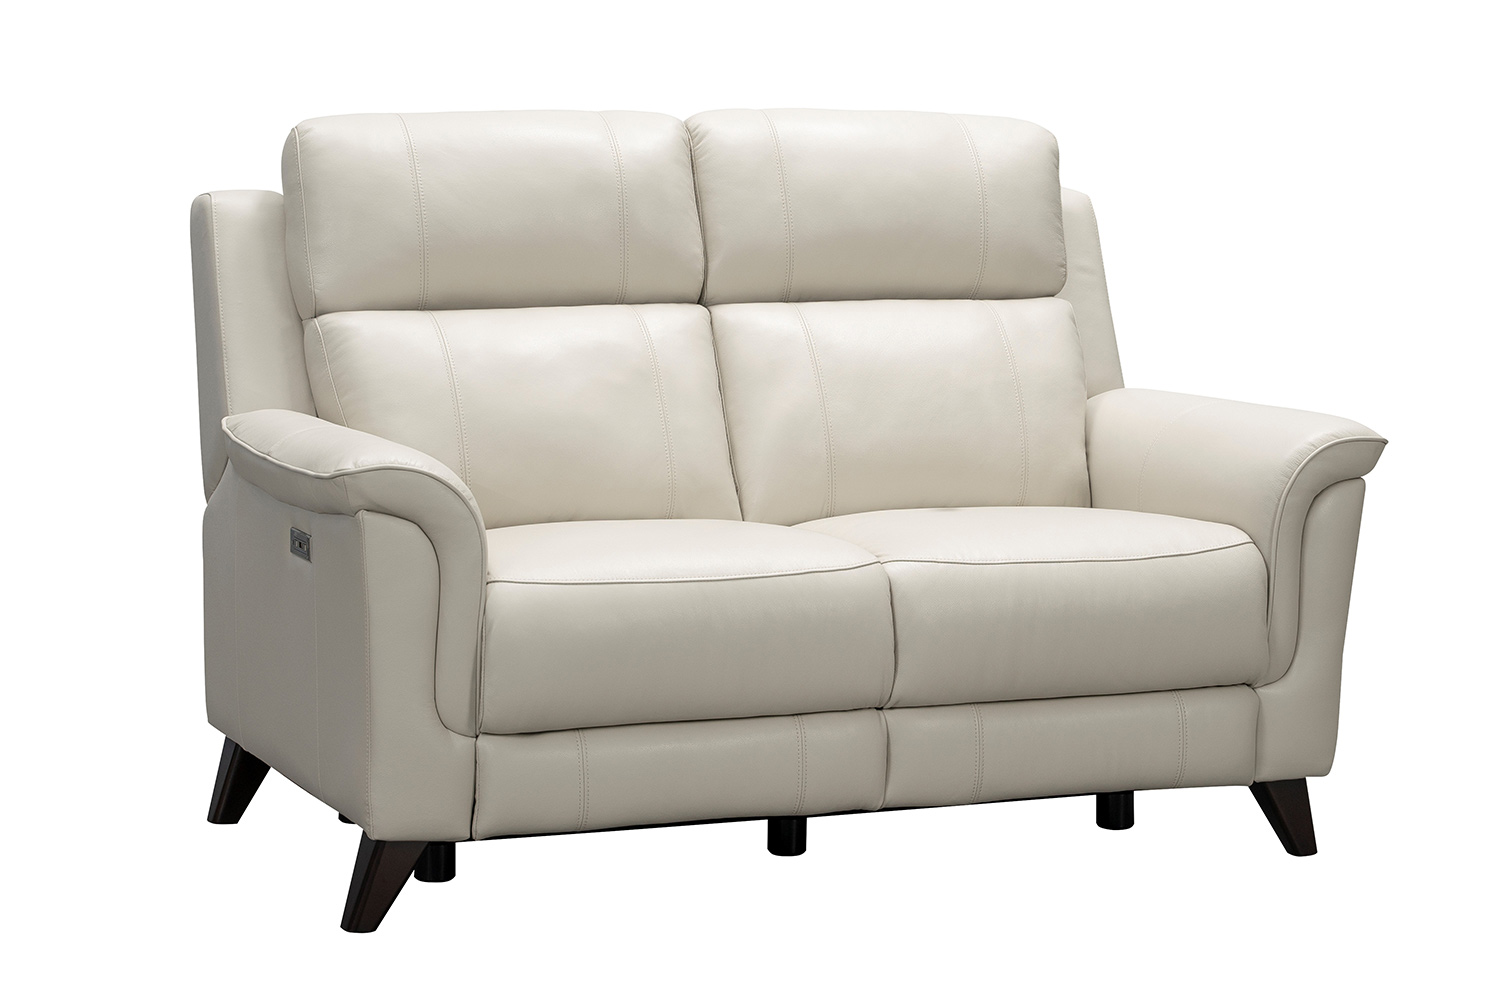 Barcalounger Kester Power Reclining Loveseat with Power Head Rests - Laurel Cream/Leather match